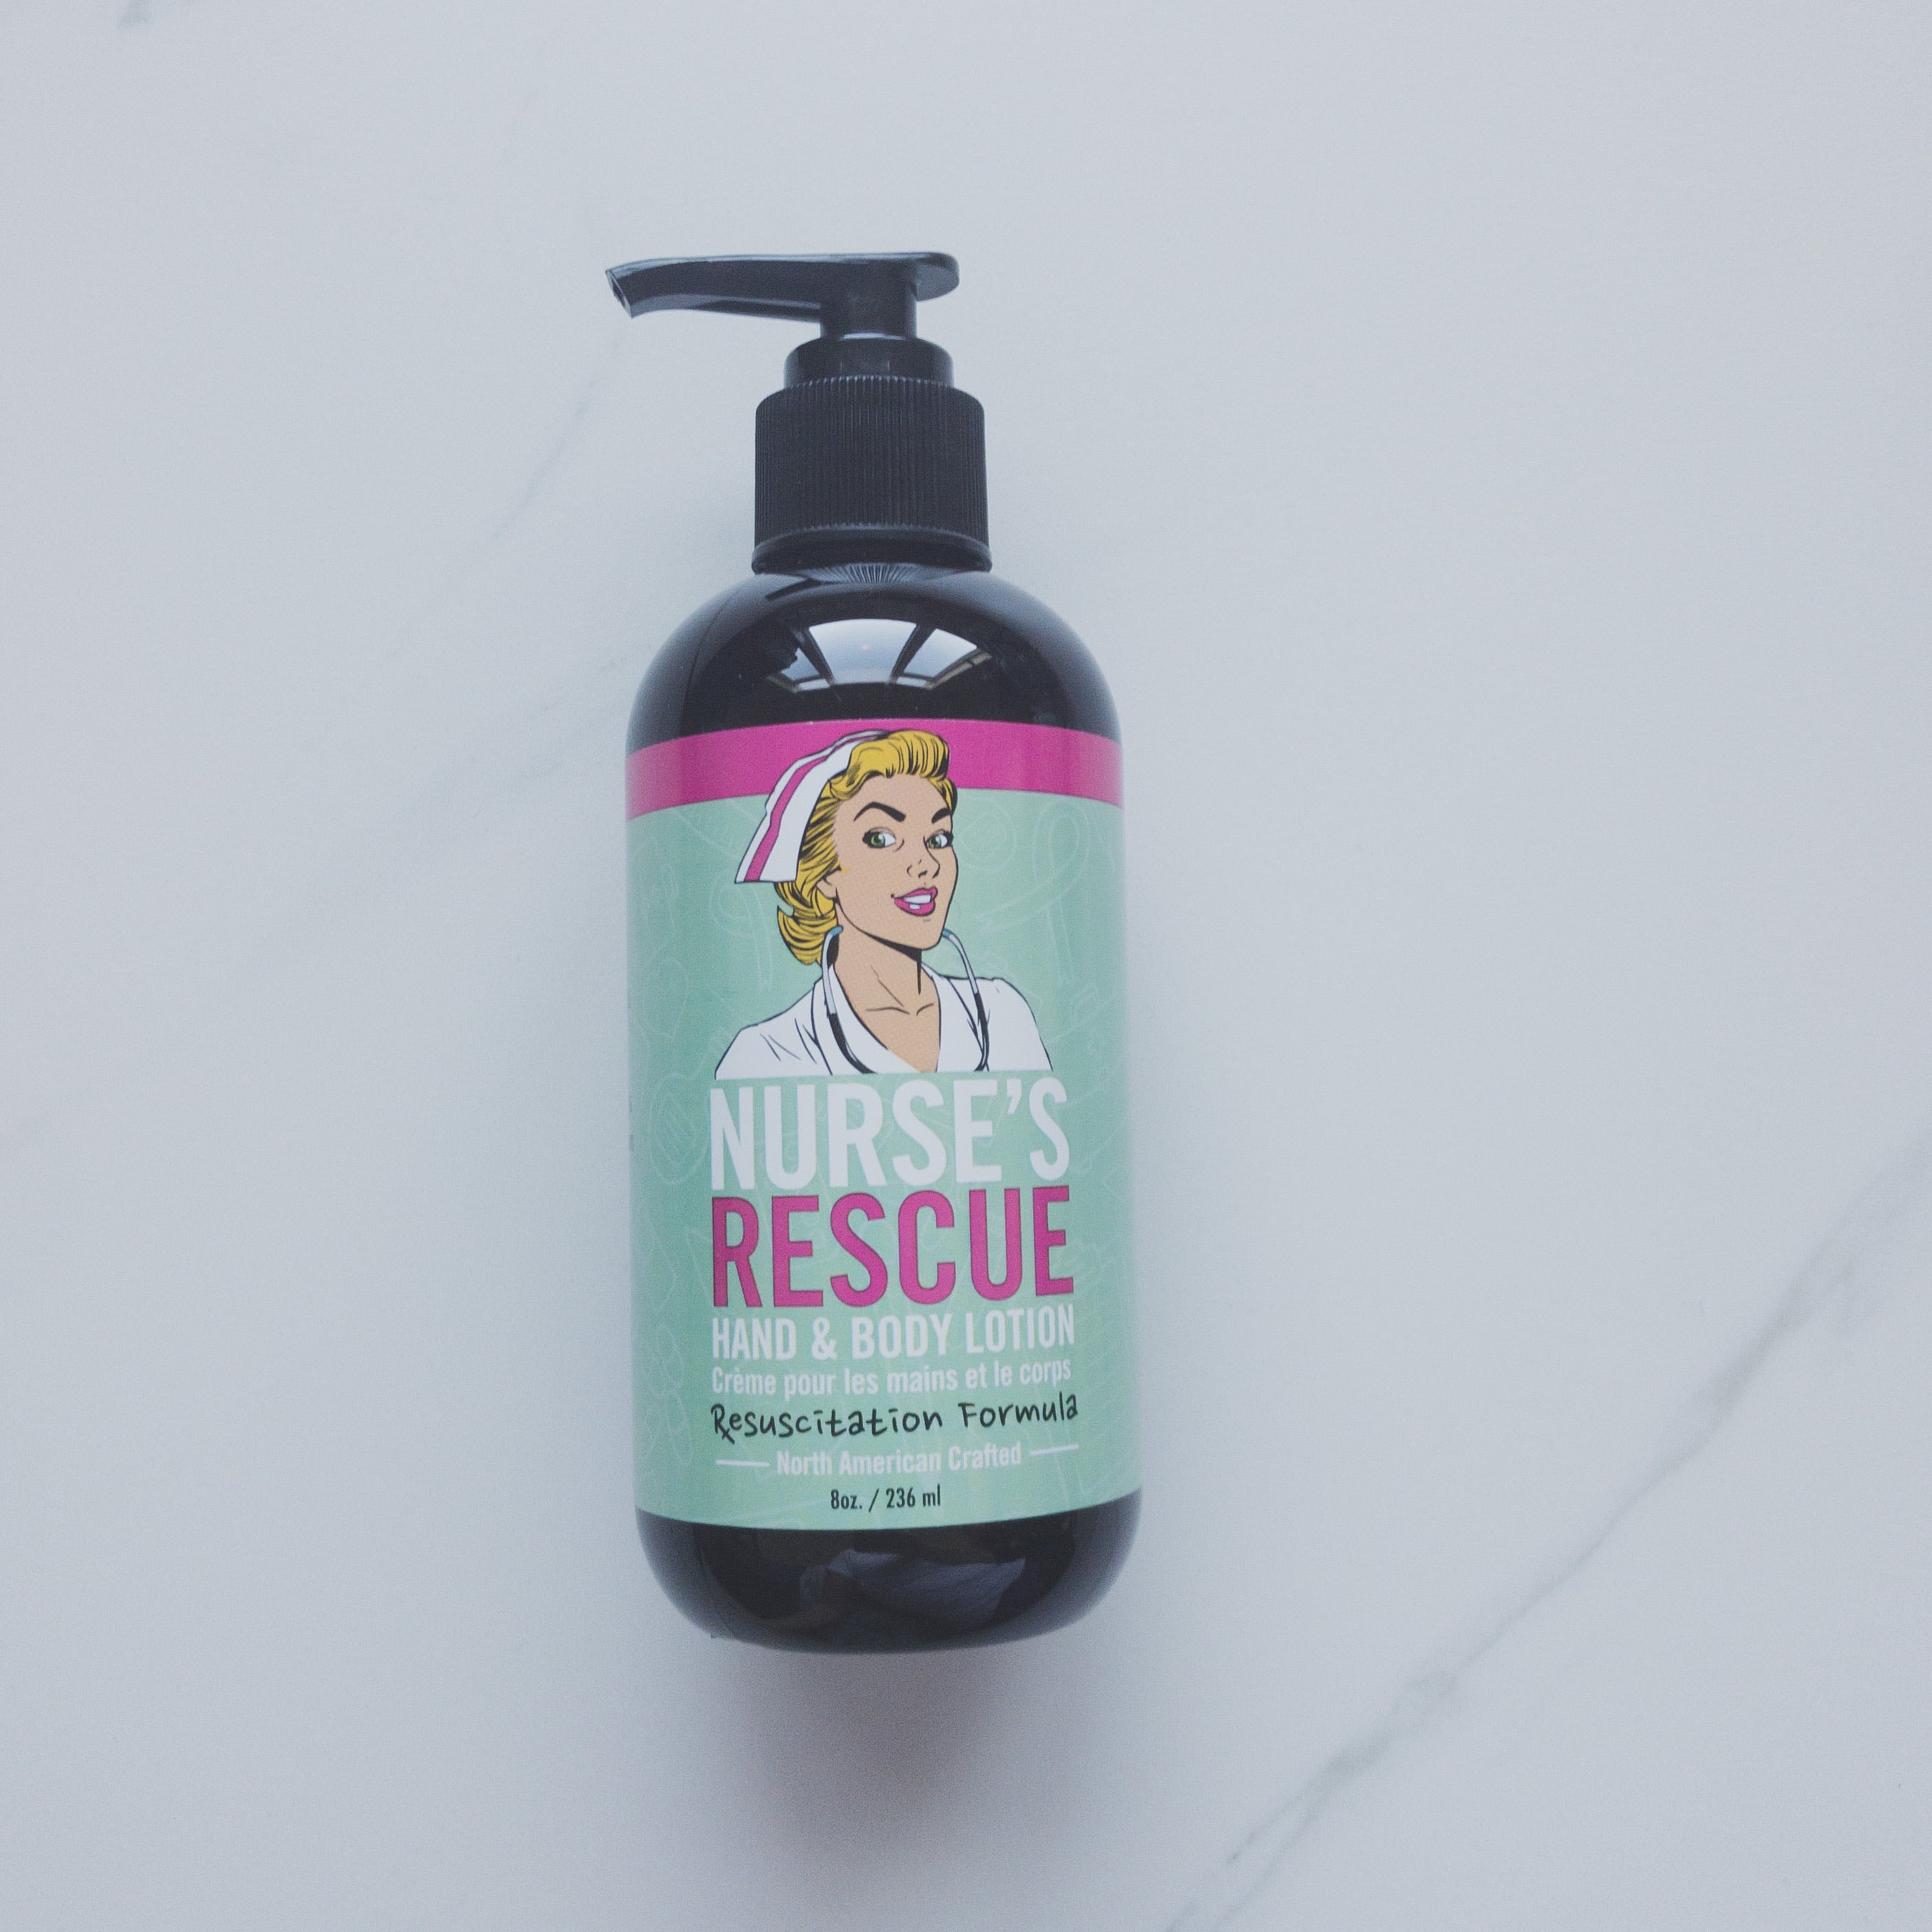 Nurse’s Rescue hand and body lotion